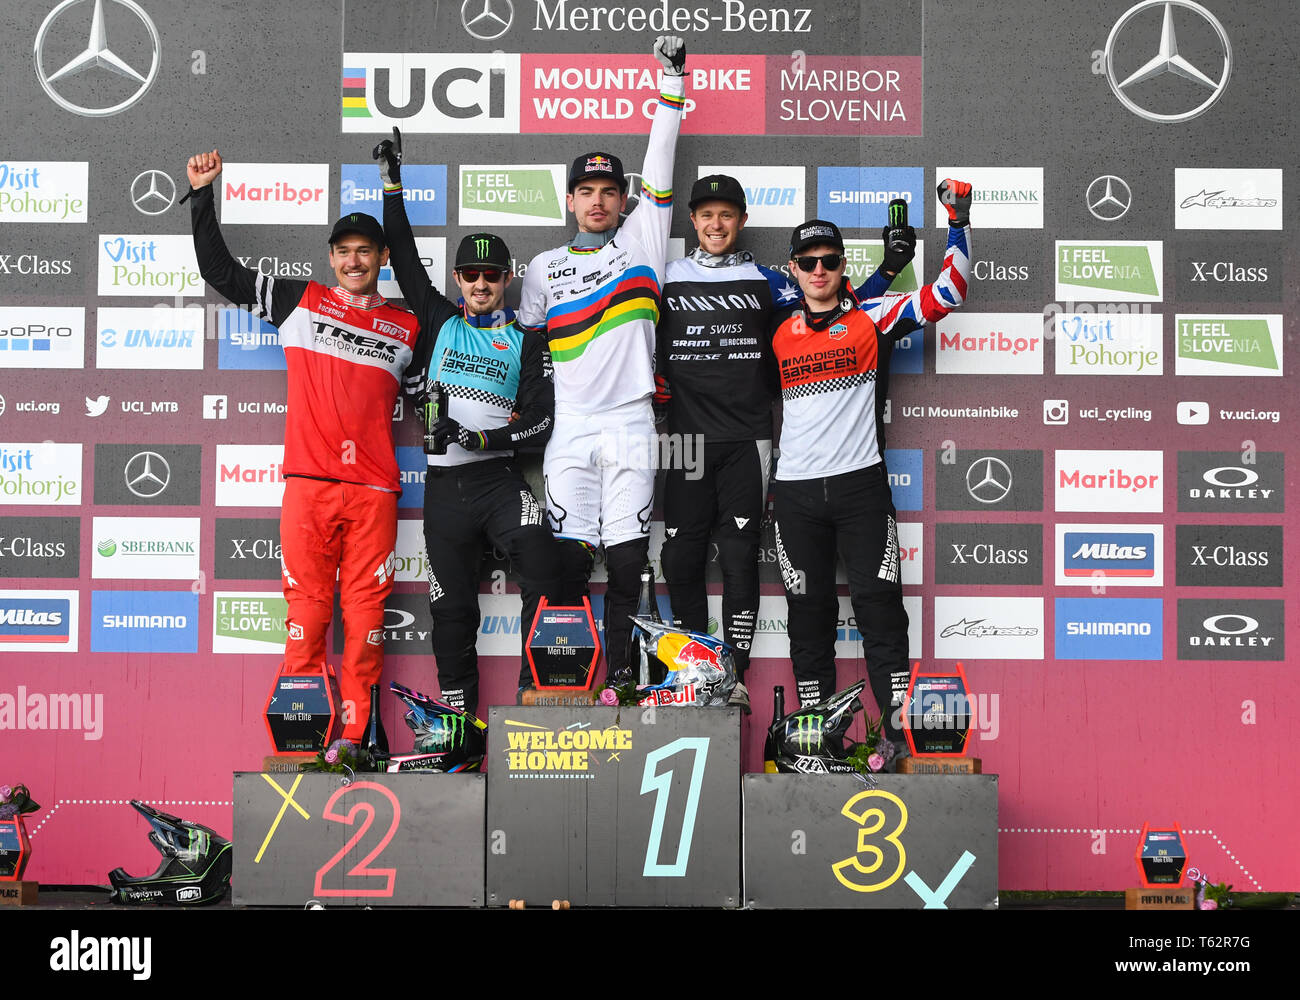 From left to right, fourth Charlie Harrison of United States, second Danny Hart of Great Britain, first Loic Bruni of France,  third Troy Brosnan and fifth Matt Walker of Great Britain are seen on the podium after the UCI Mountain Bike World Cup Finals in Maribor. Stock Photo